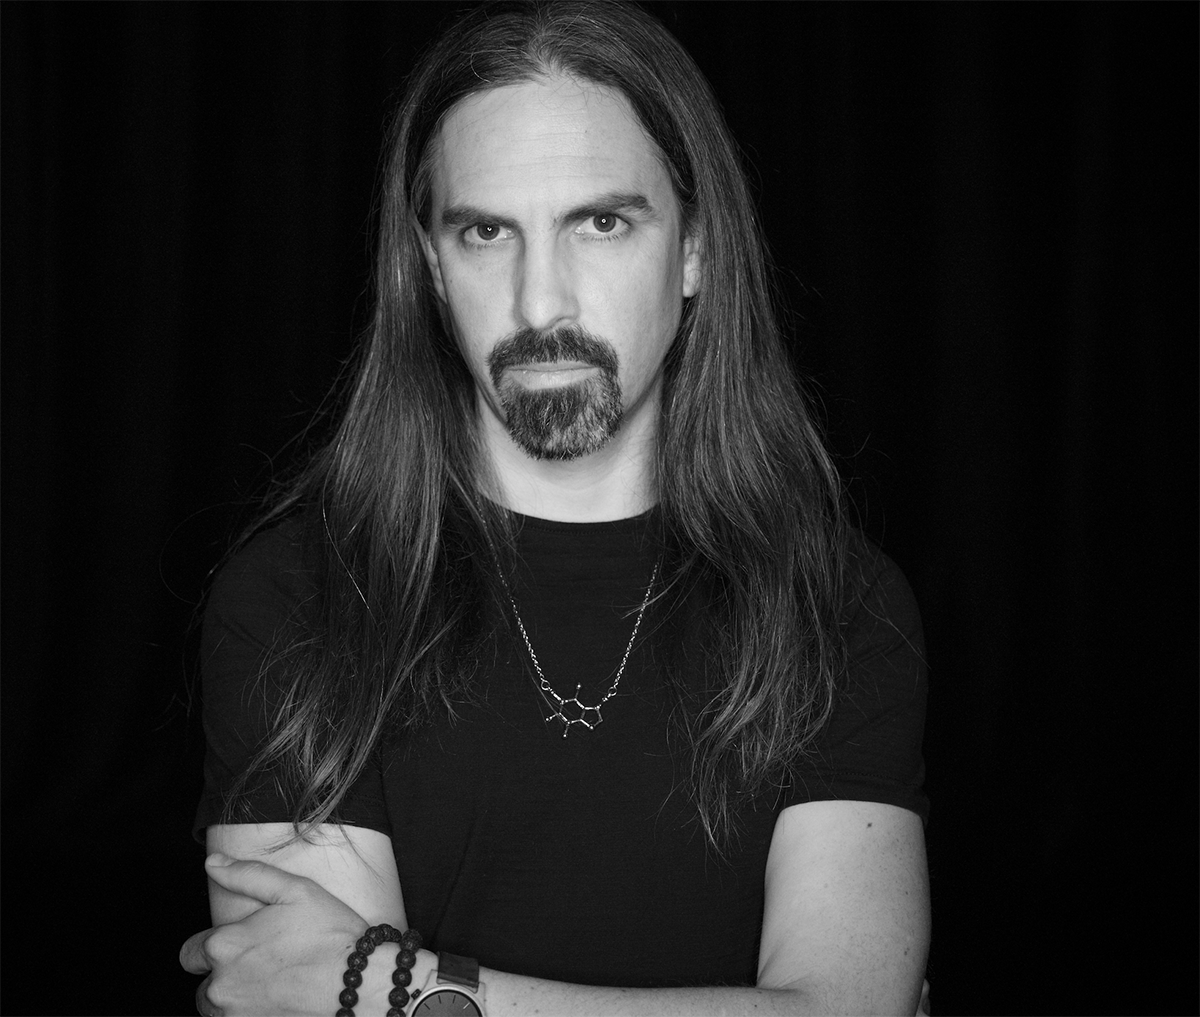 Bear McCreary music, stats and more